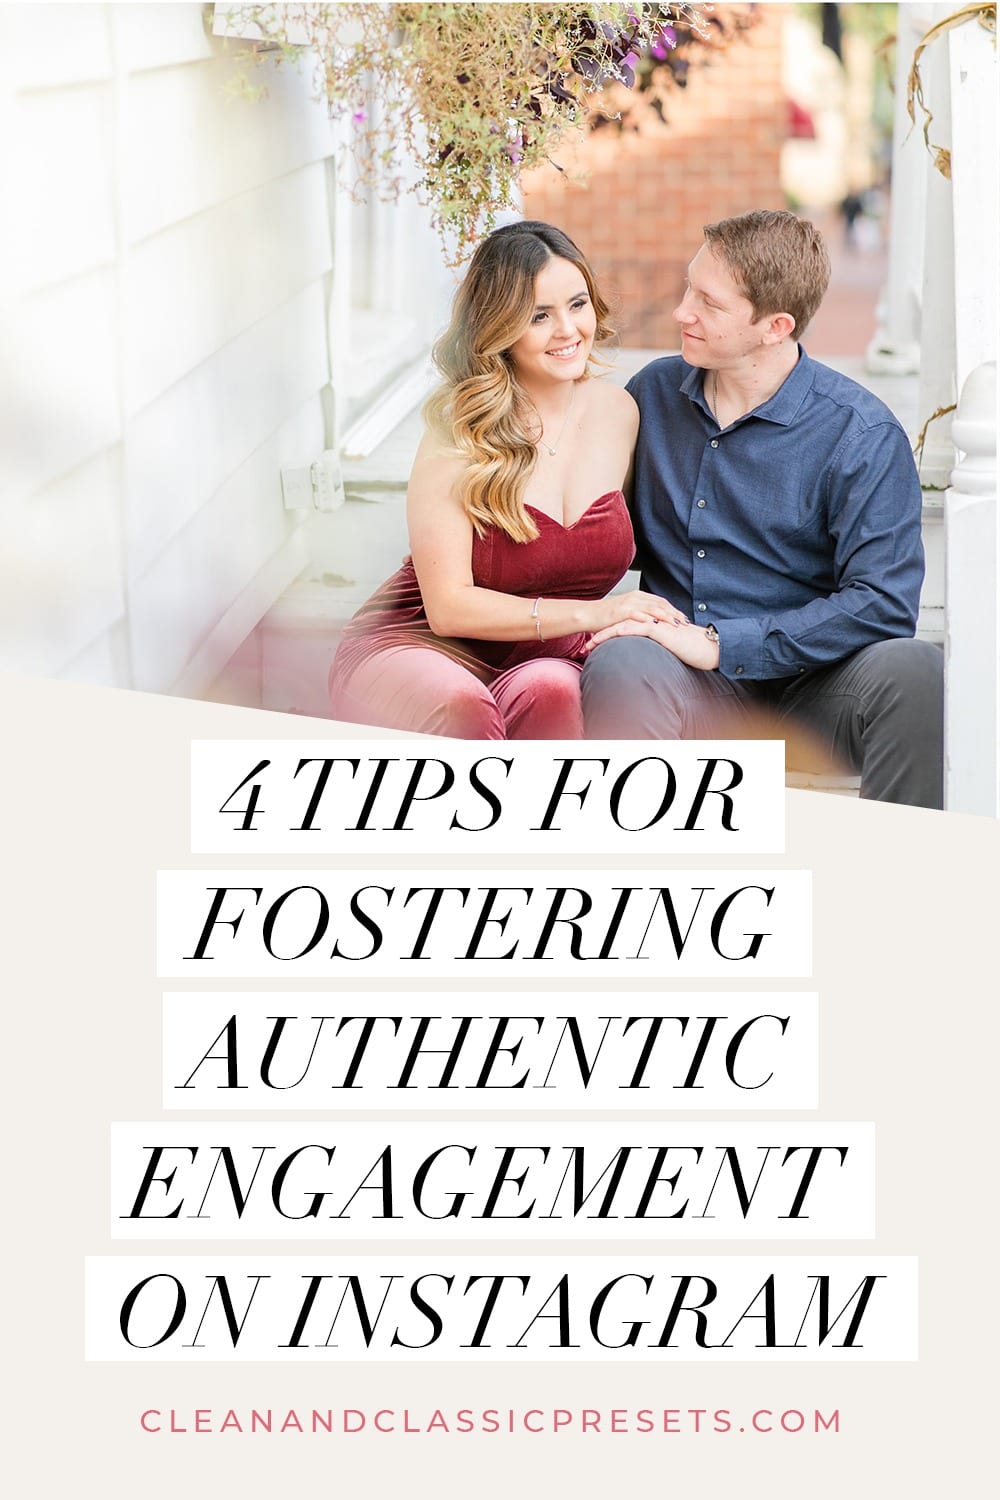 4 Tips for Fostering Authentic Engagement on Instagram